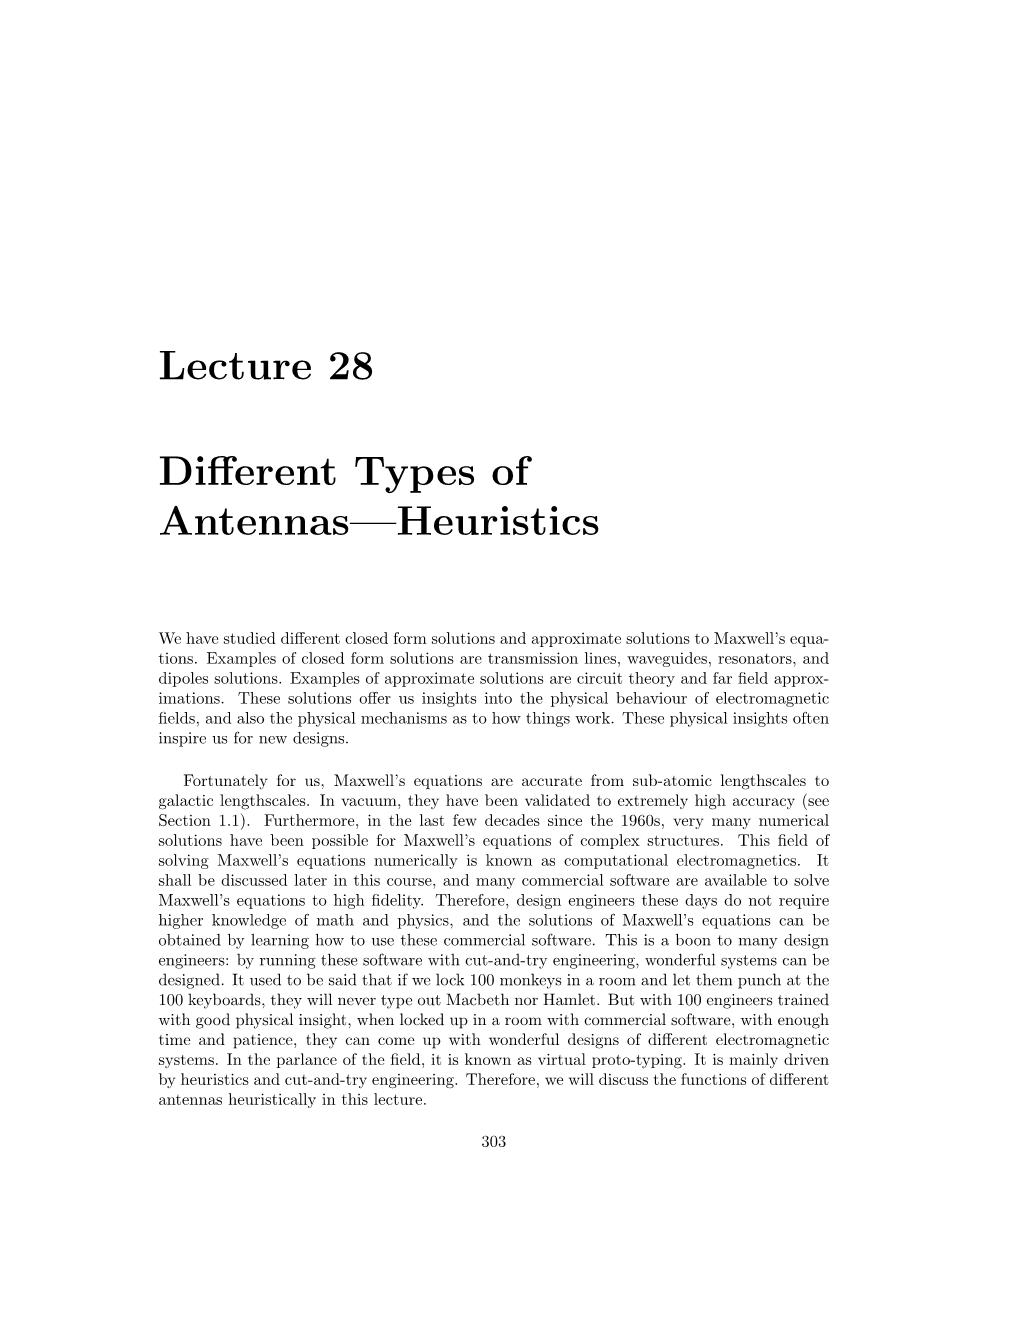 Lecture 28 Different Types of Antennas—Heuristics